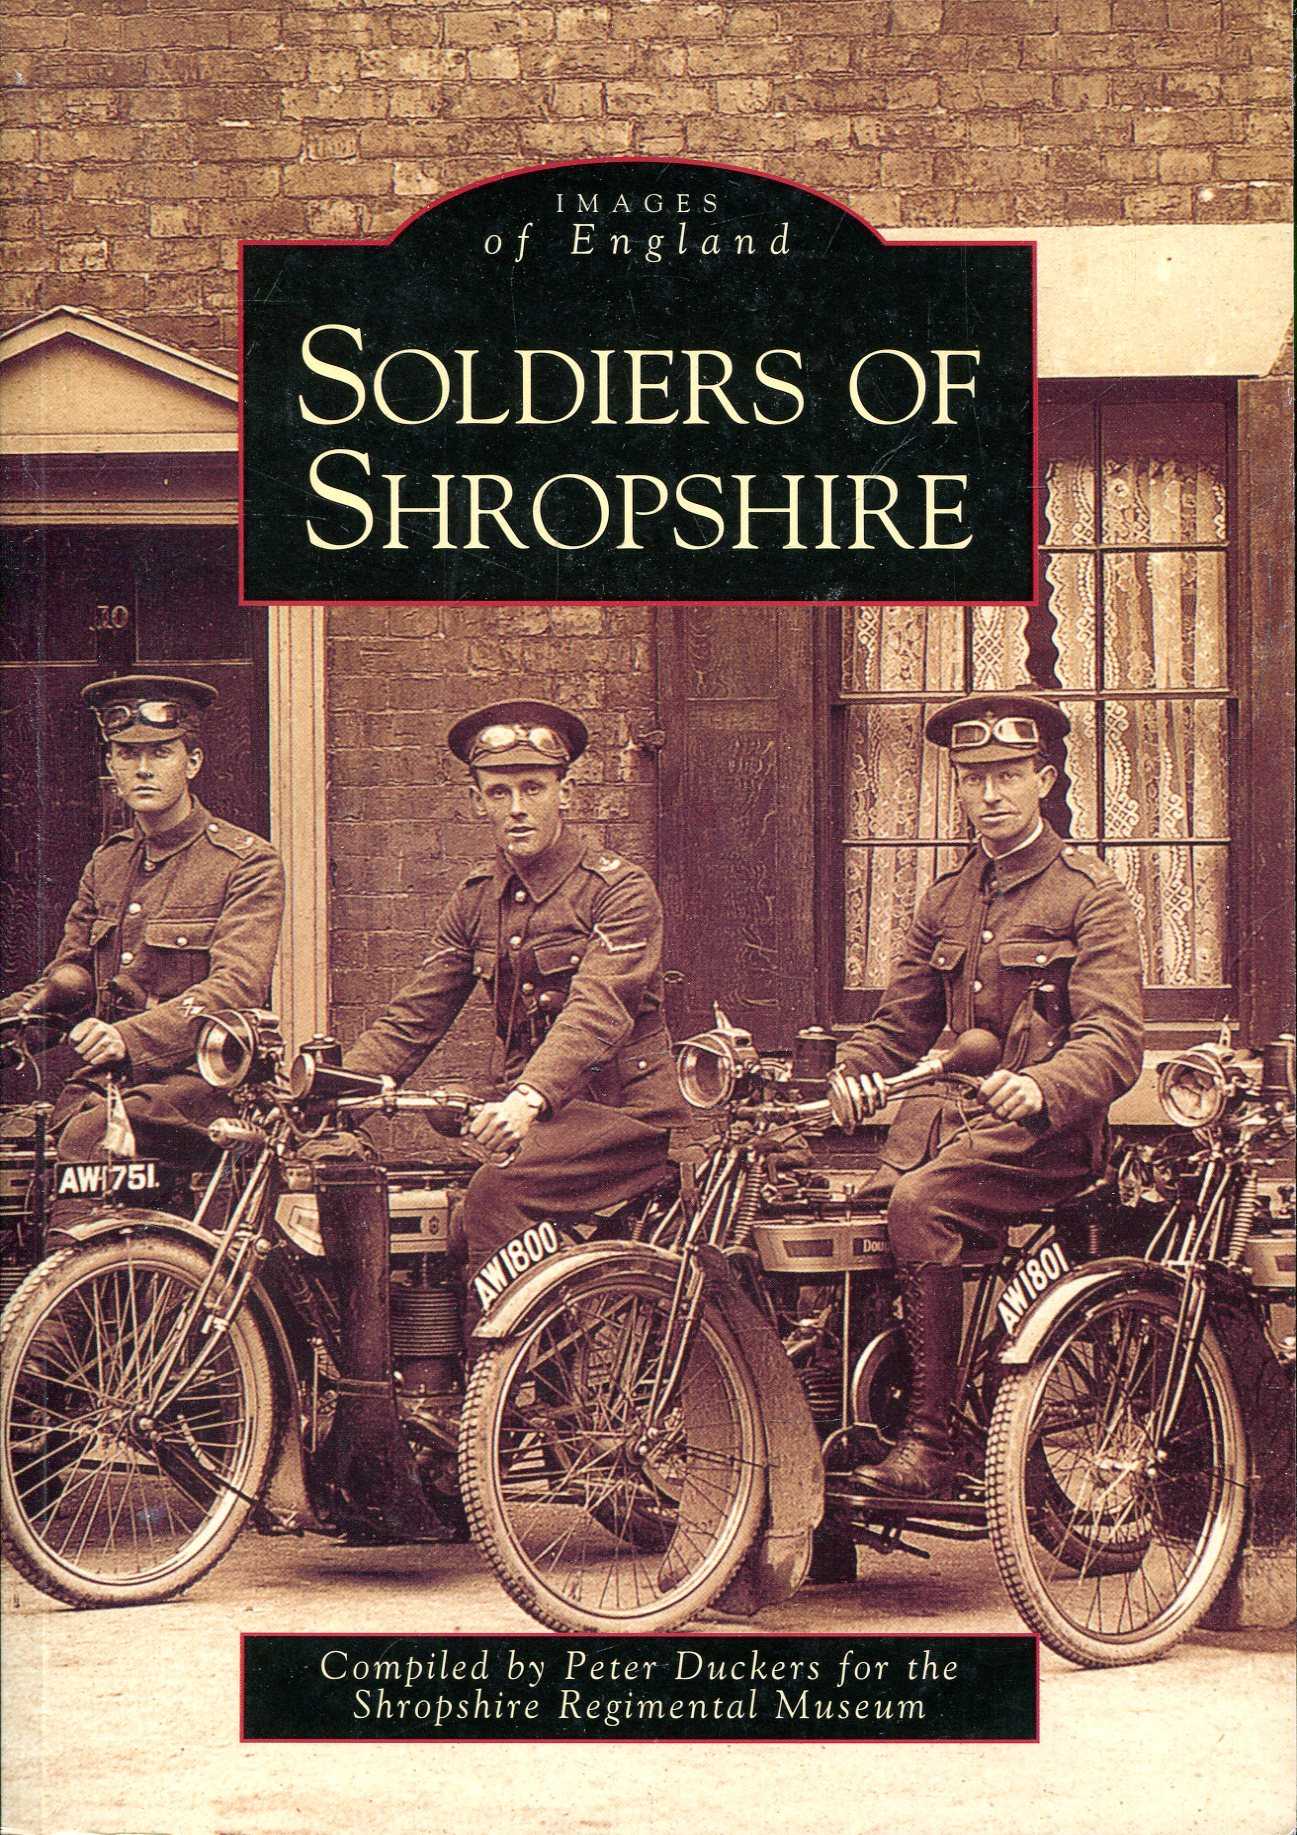 Soldiers of Shropshire (Archive Photographs: Images of England) - Duckers, Peter (compiler)